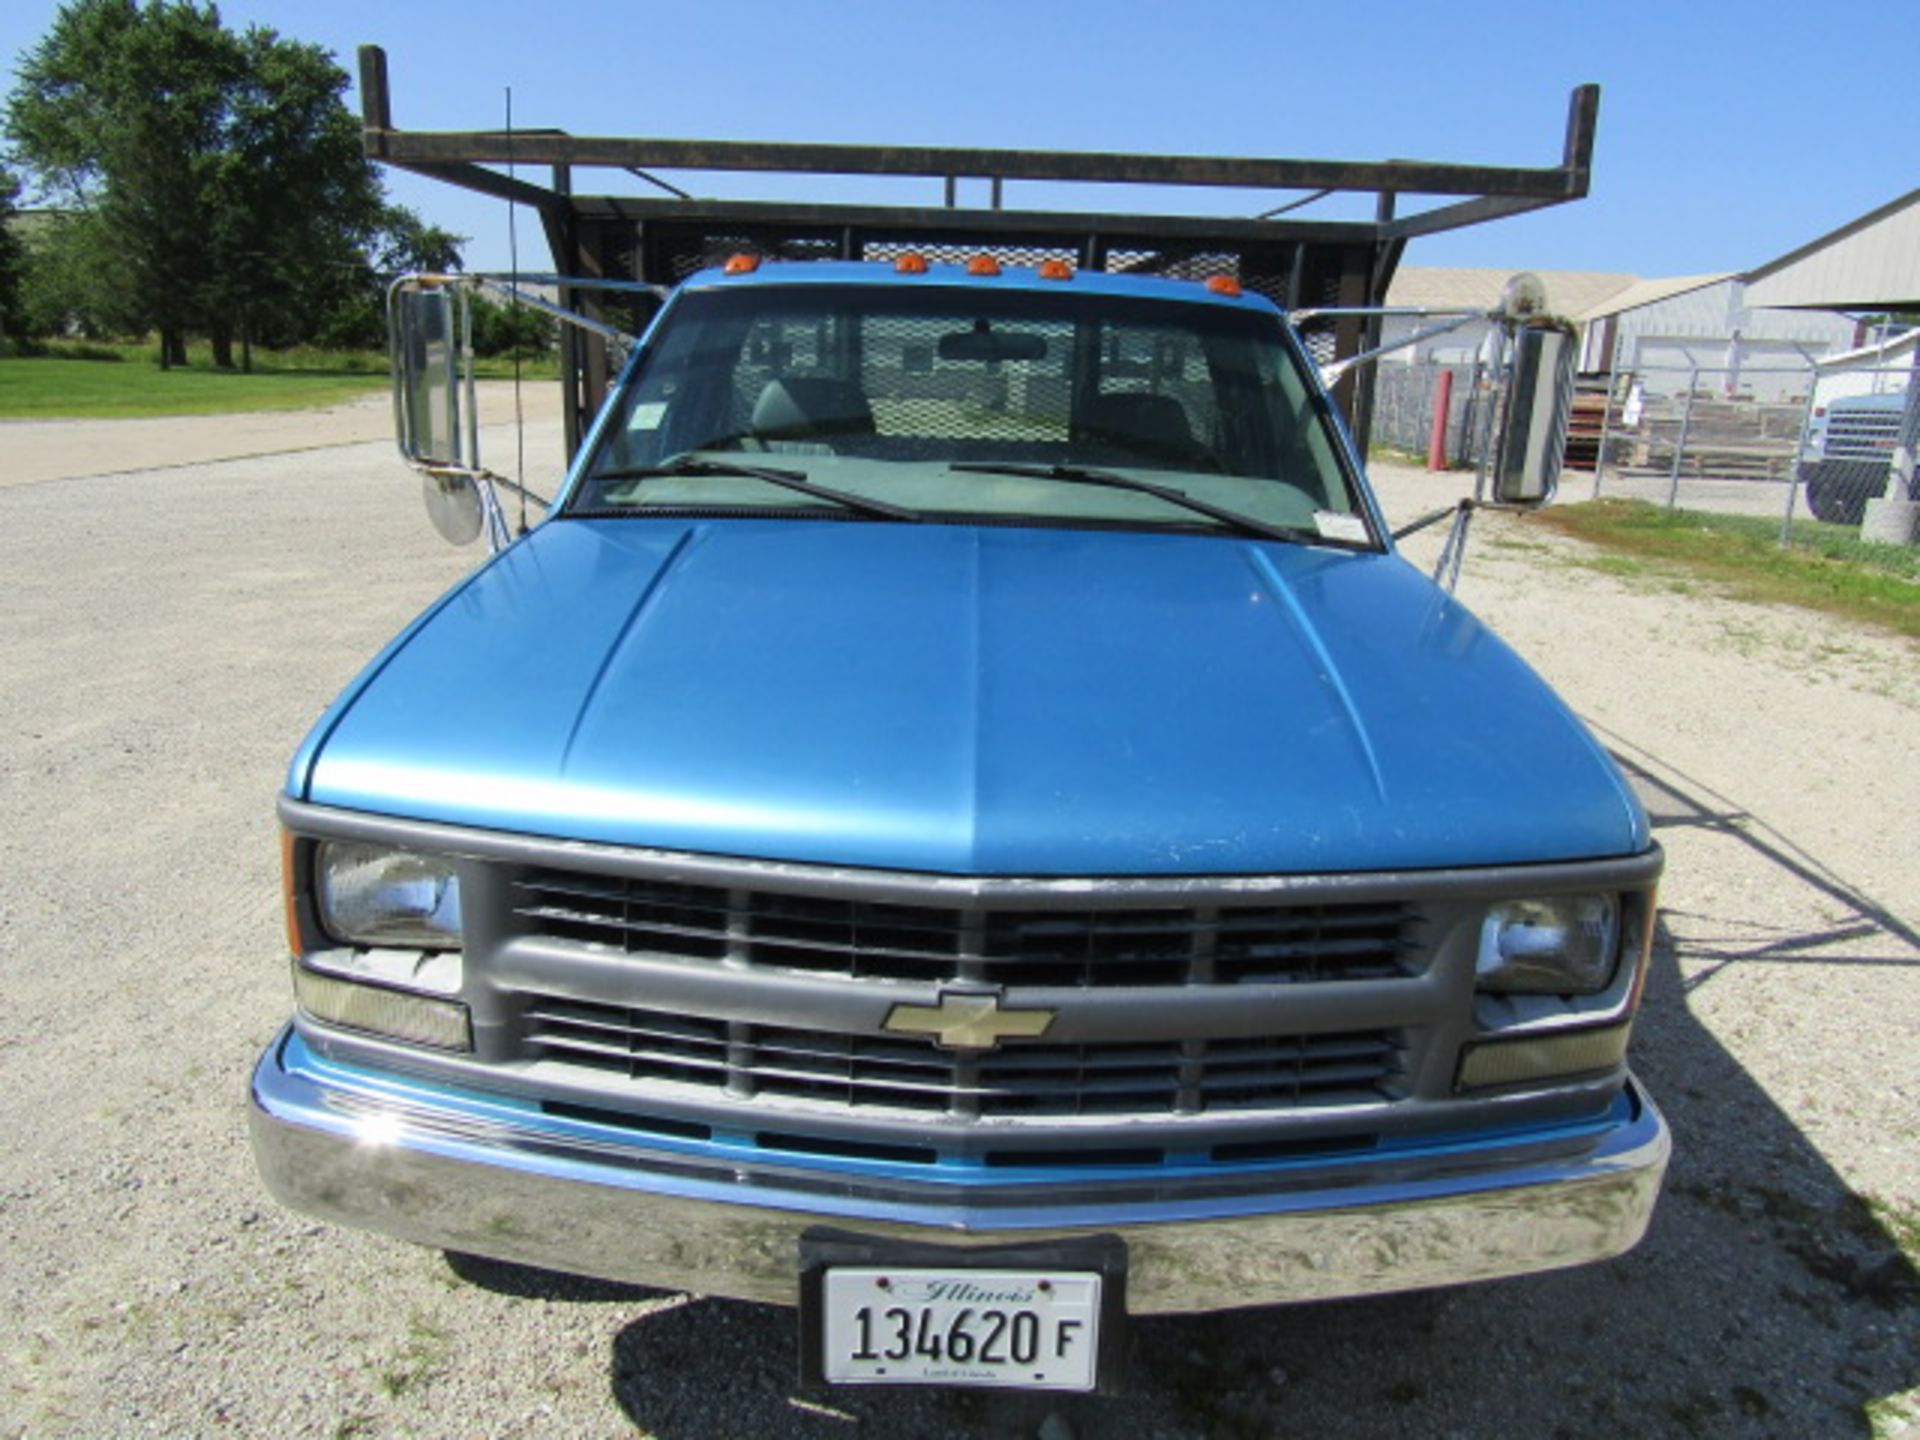 1999 Chevy 3500 Form Pick Up w/Tool Boxes, 9' Bed, Model GMT-400, Dually, VIN #1GBJC34J0XF063255, - Image 3 of 27